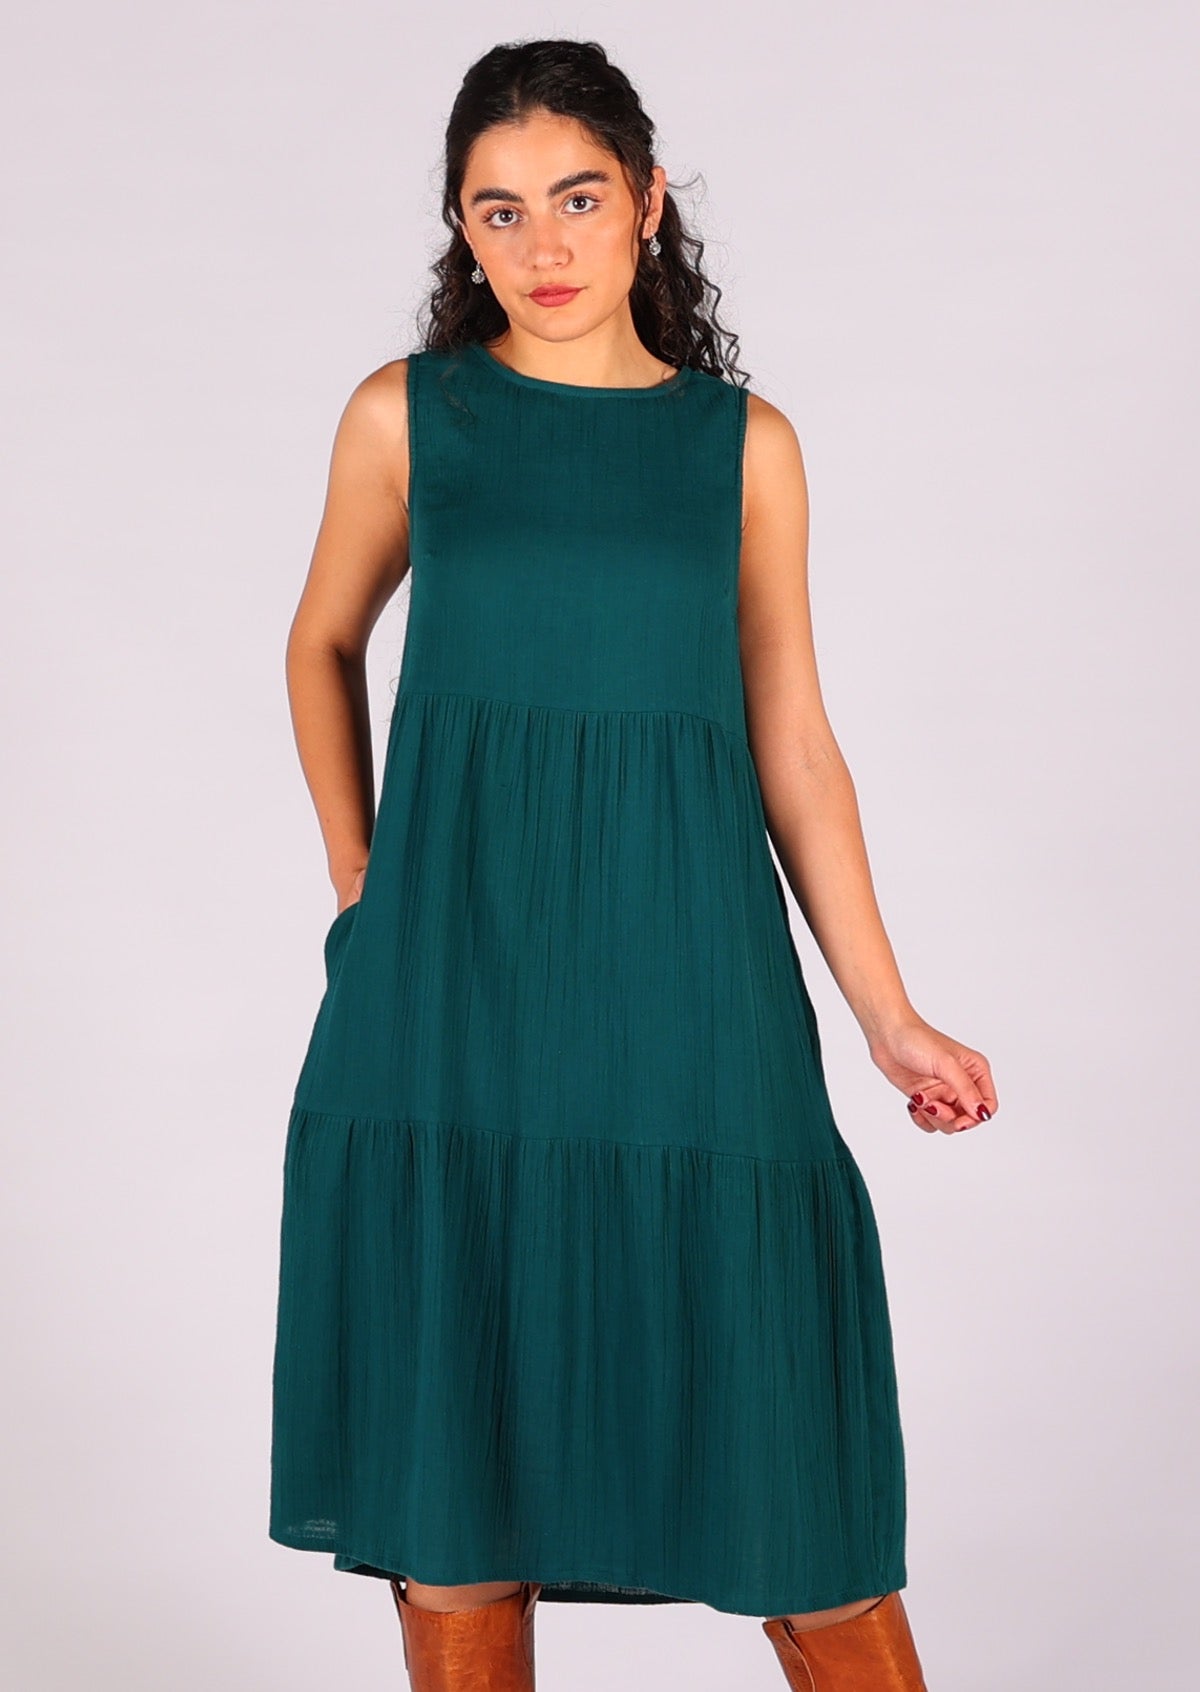 Lightweight cotton gauze makes up this dress that is perfect for the warm days, and can be layered for the cool